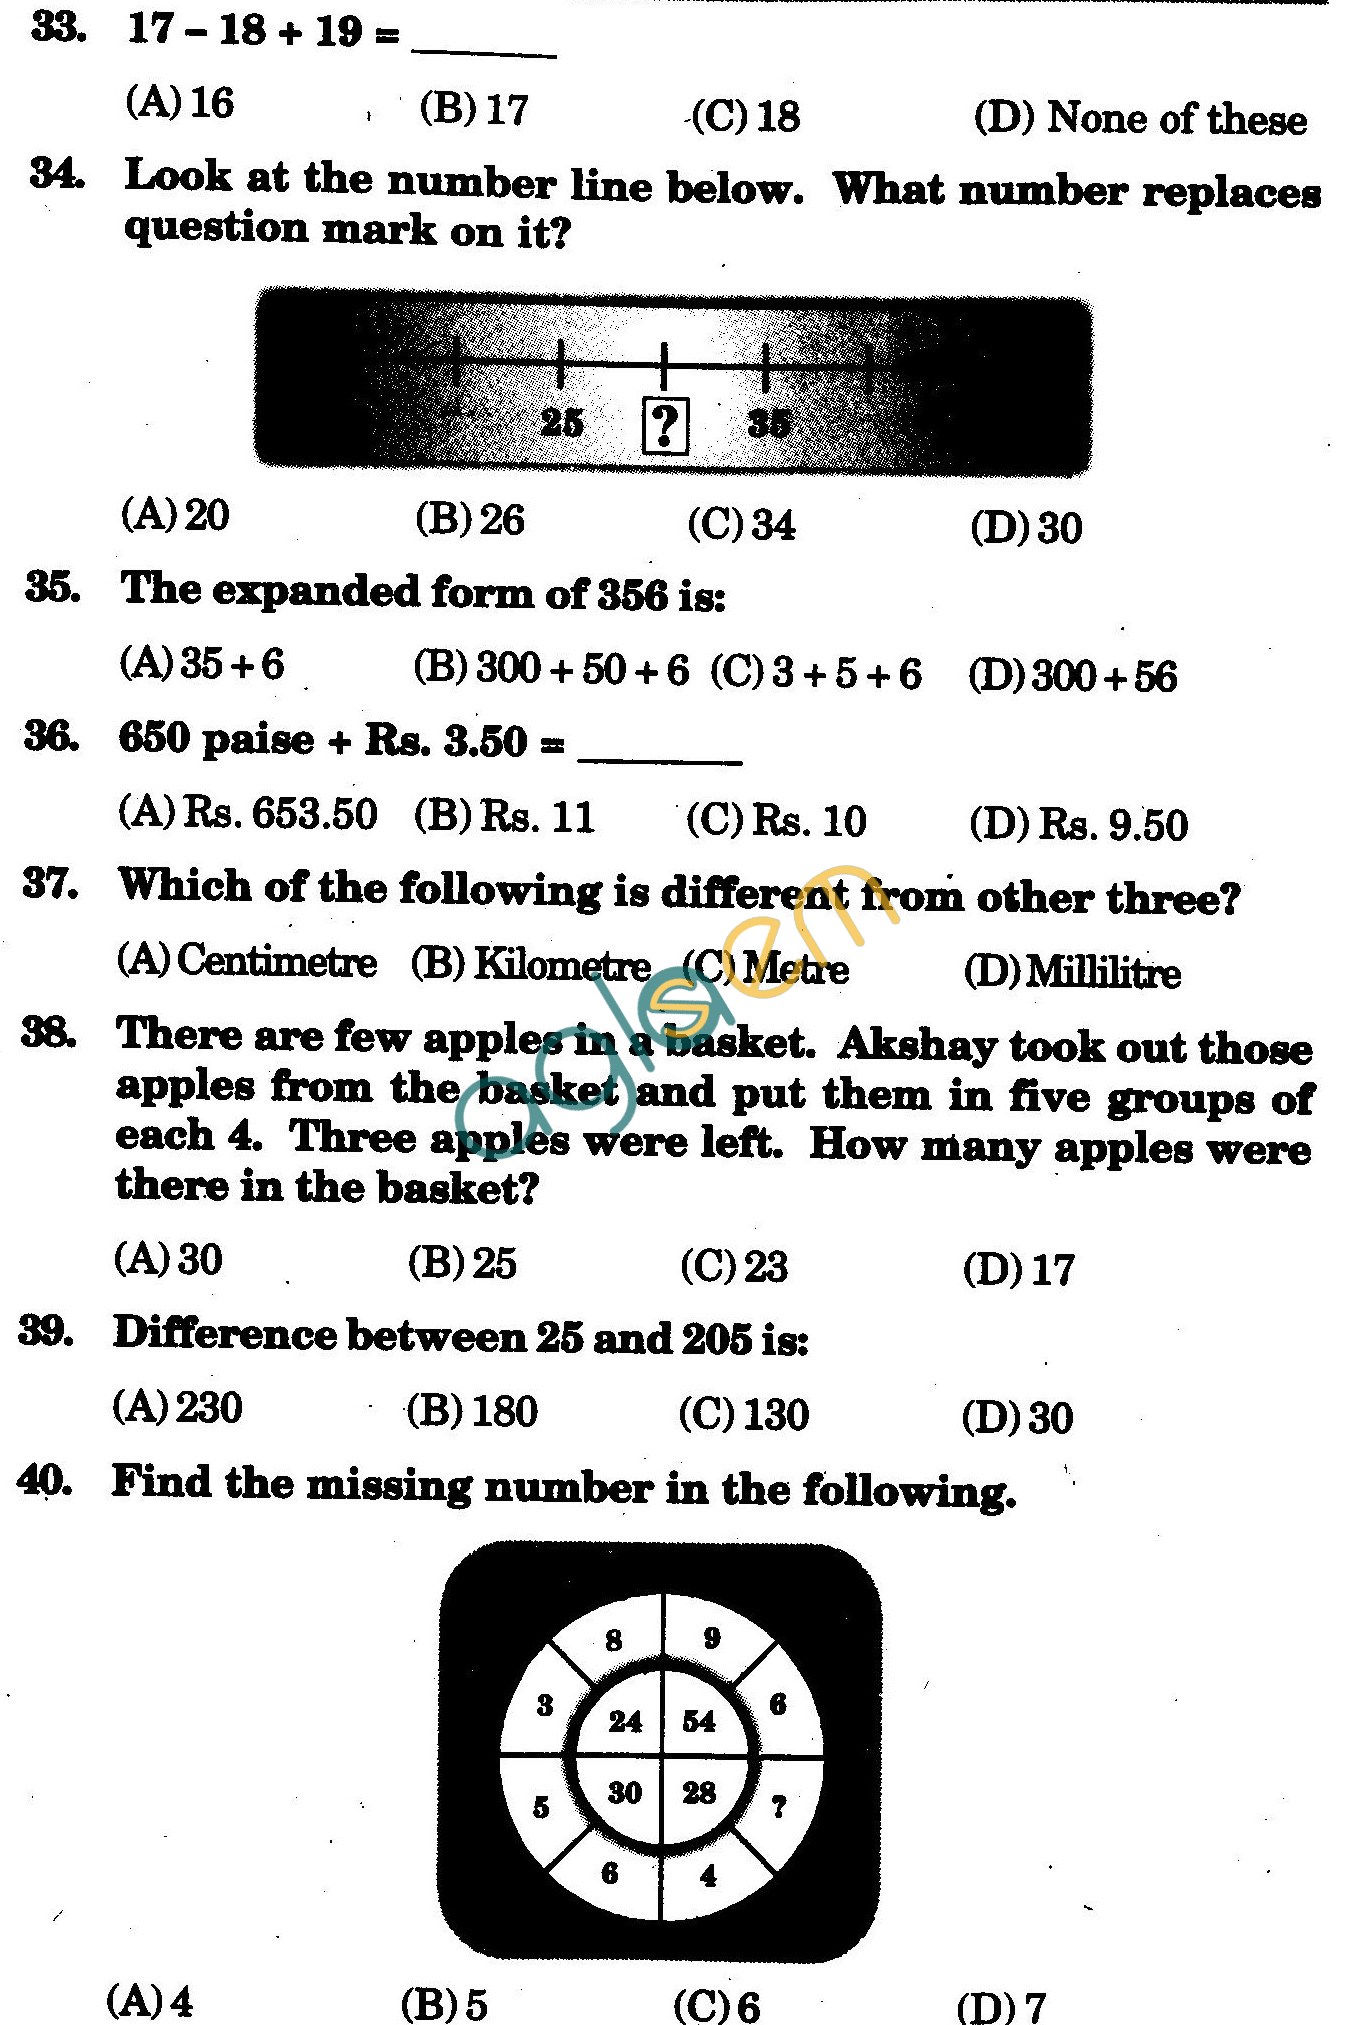 NSTSE 2009 Class III Question Paper with Answers - Mathematics